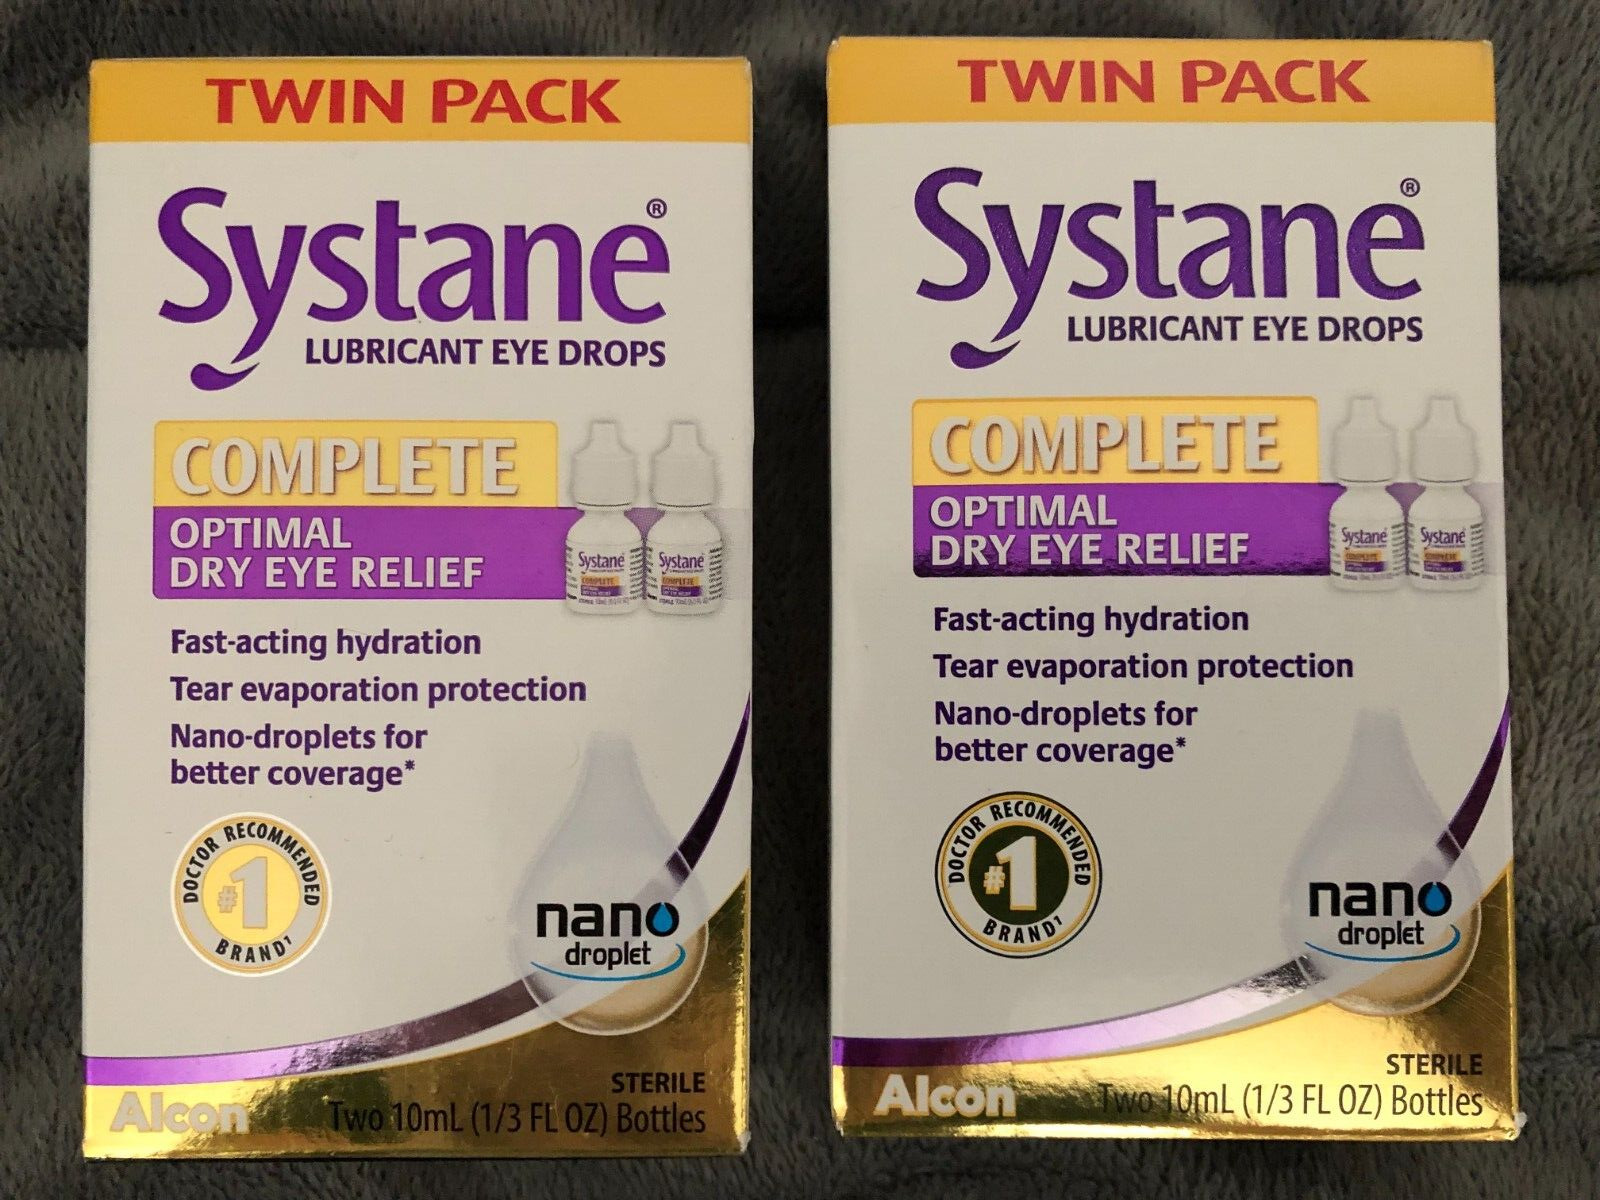 New Lot Of 2 Twin Packs Systane Complete Optimal Dry Eye Relief 4 Bottles